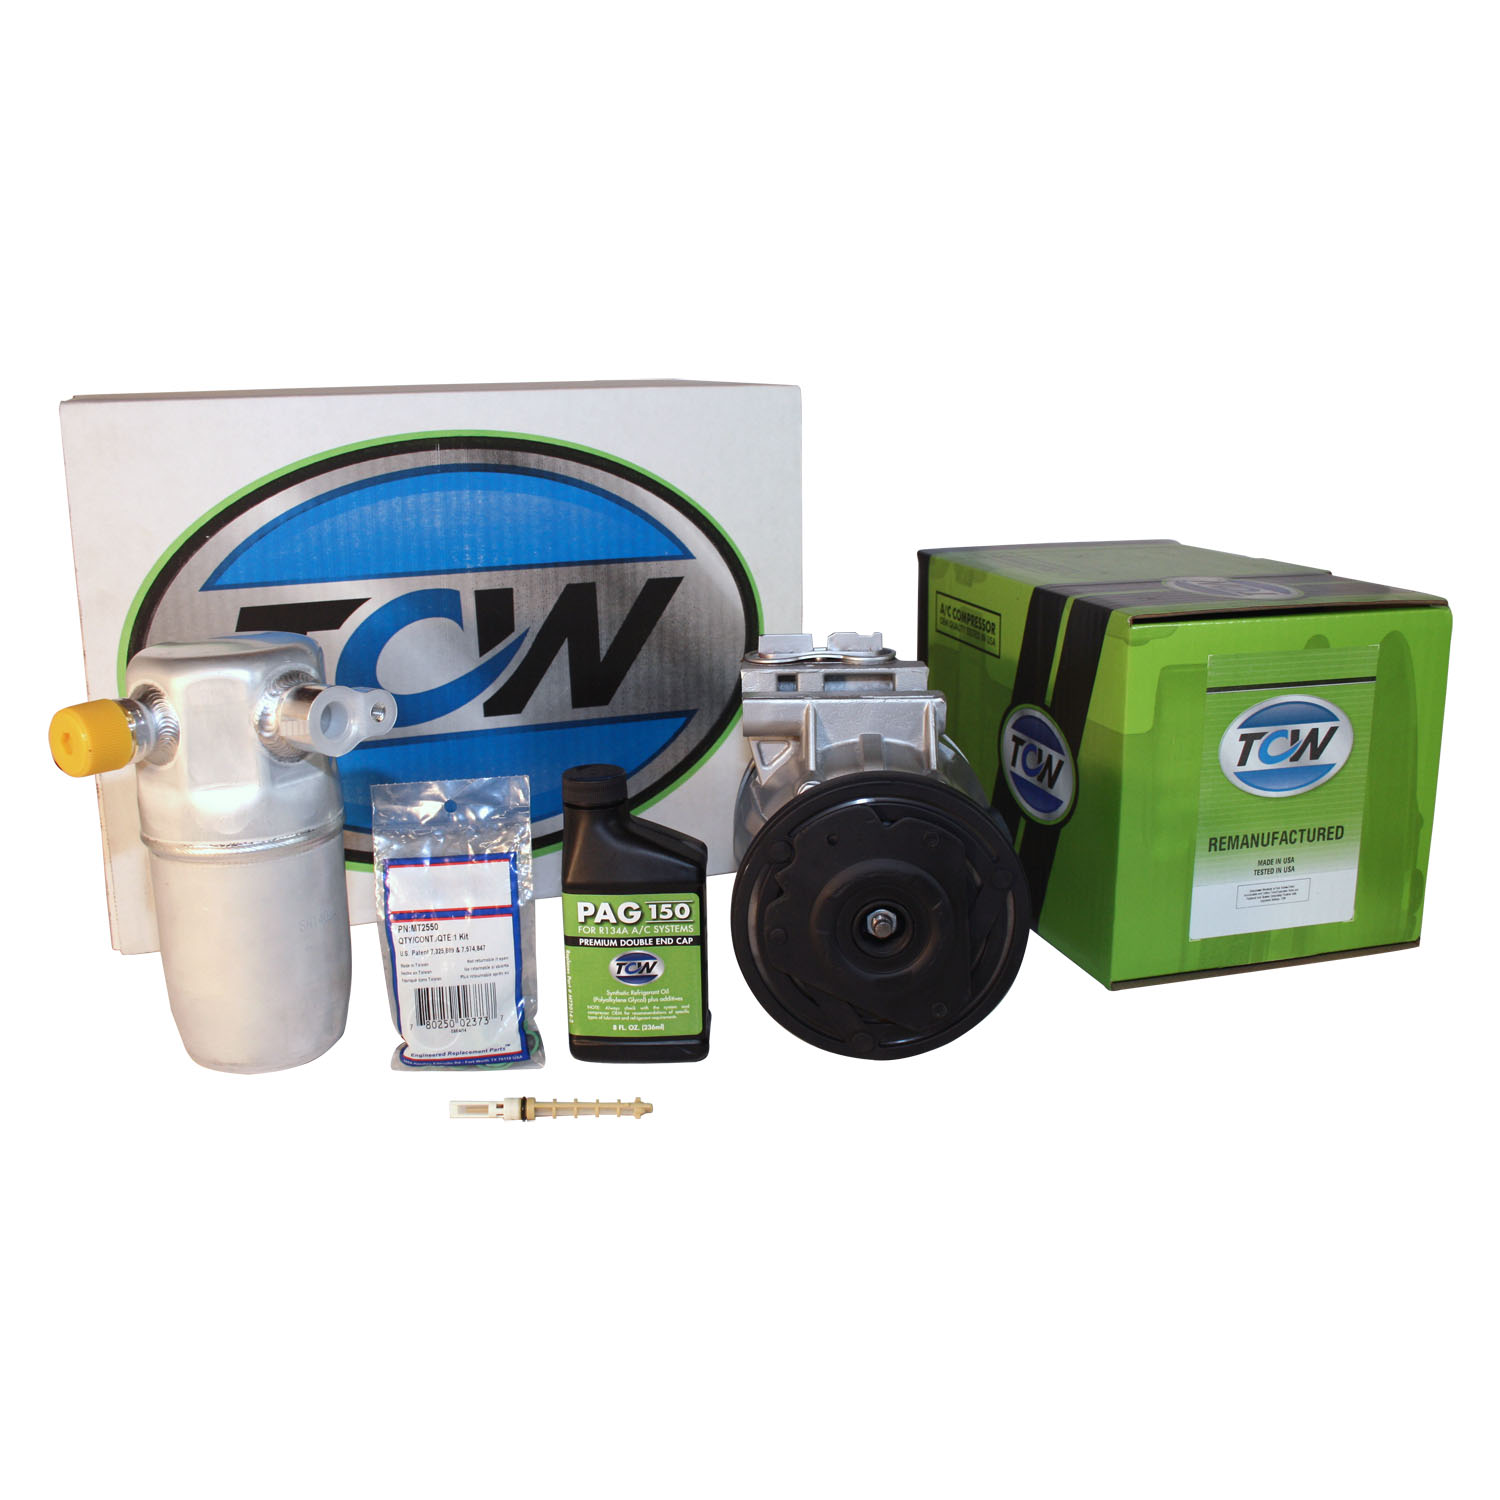 TCW Vehicle A/C Kit K1000366R Remanufactured Product Image field_60b6a13a6e67c